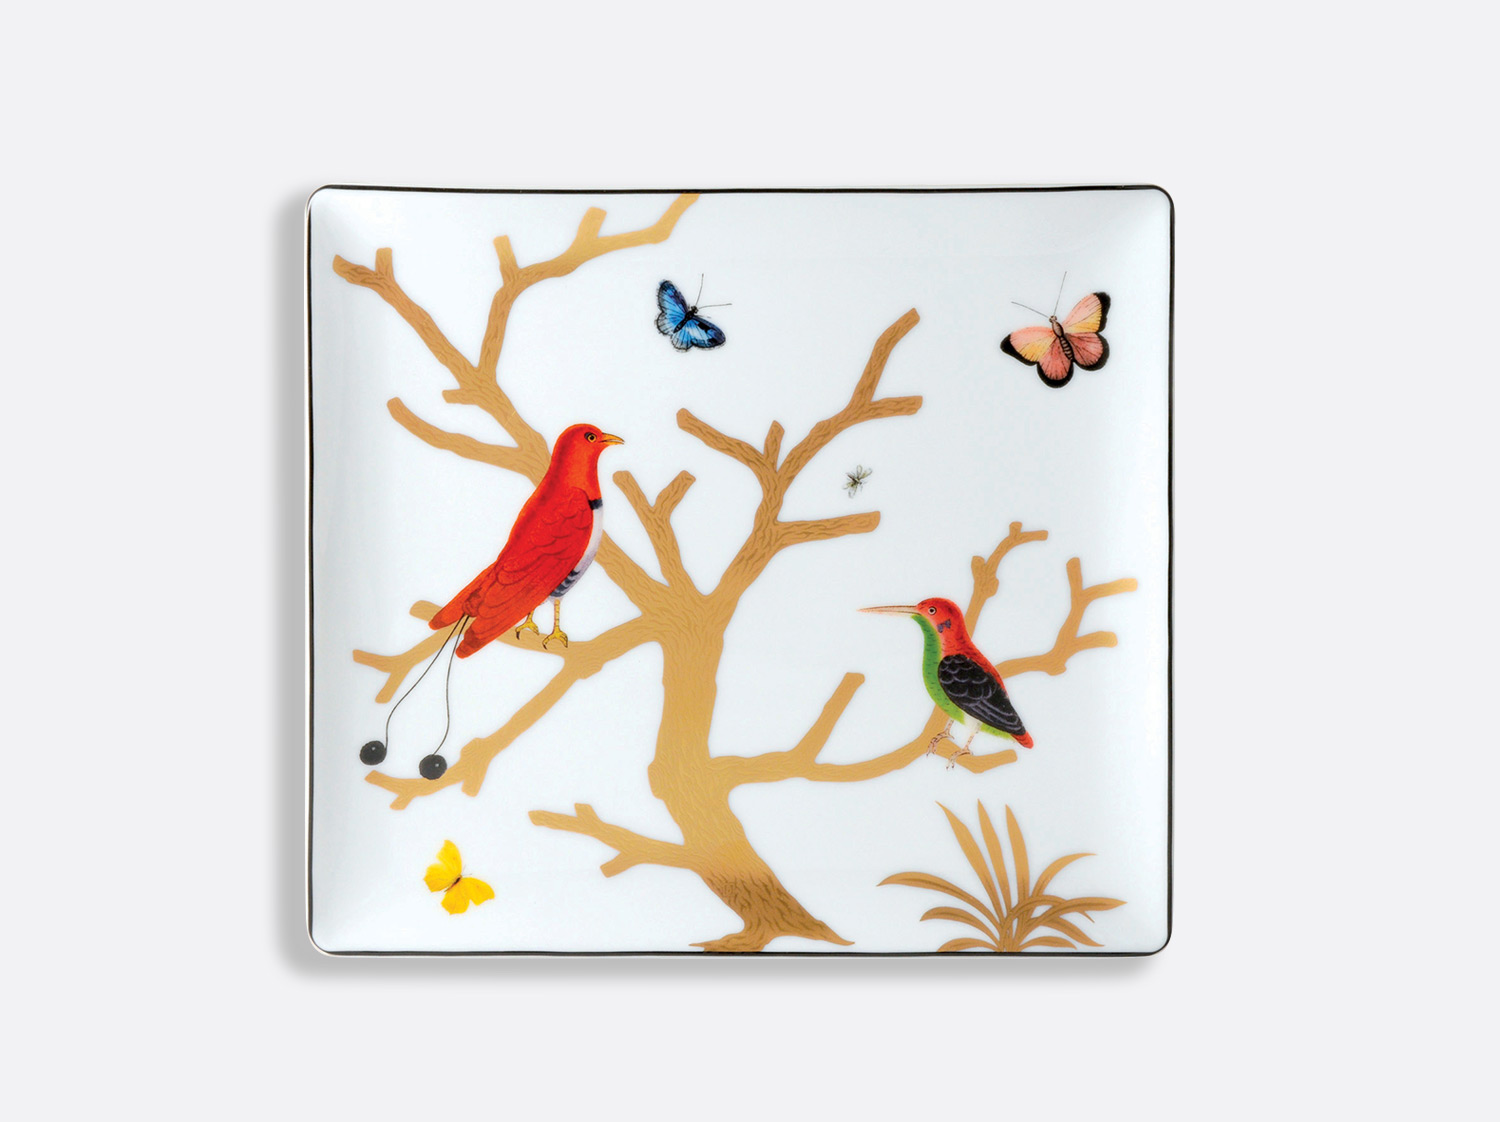 China Rectangular tray 8.7" X 7.7" of the collection Aux oiseaux | Bernardaud